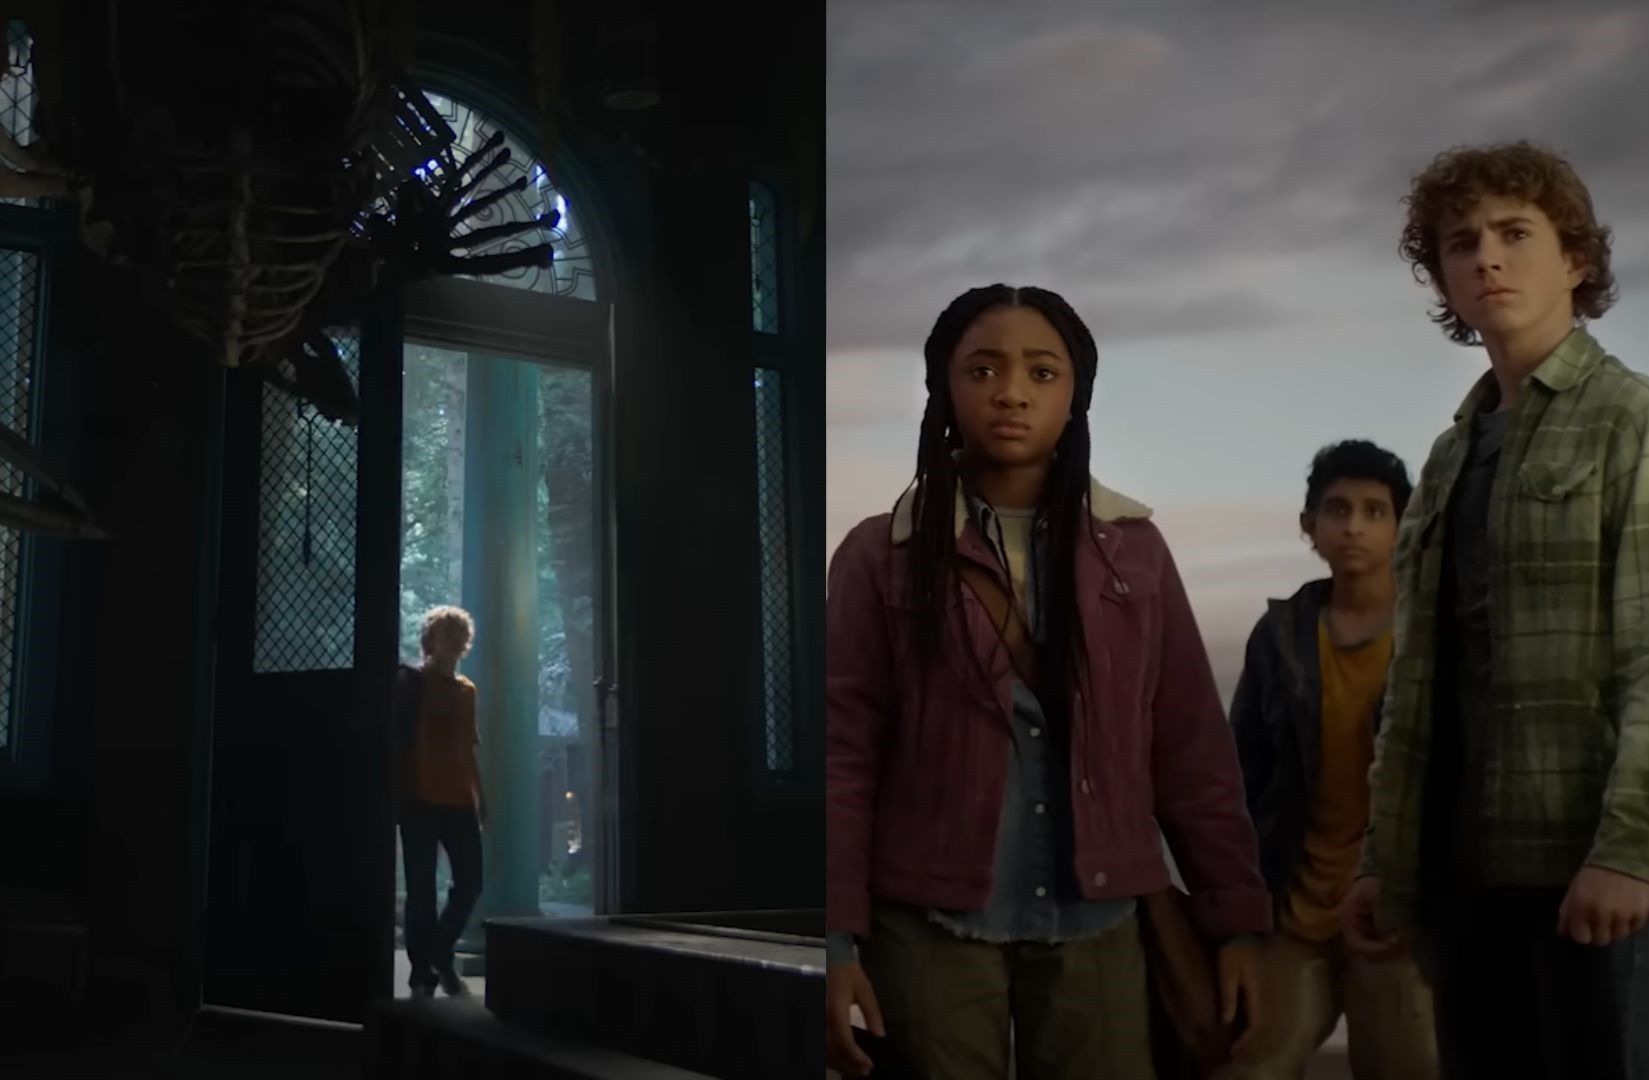 Disney announces 'Percy Jackson' series release date, drops new teaser